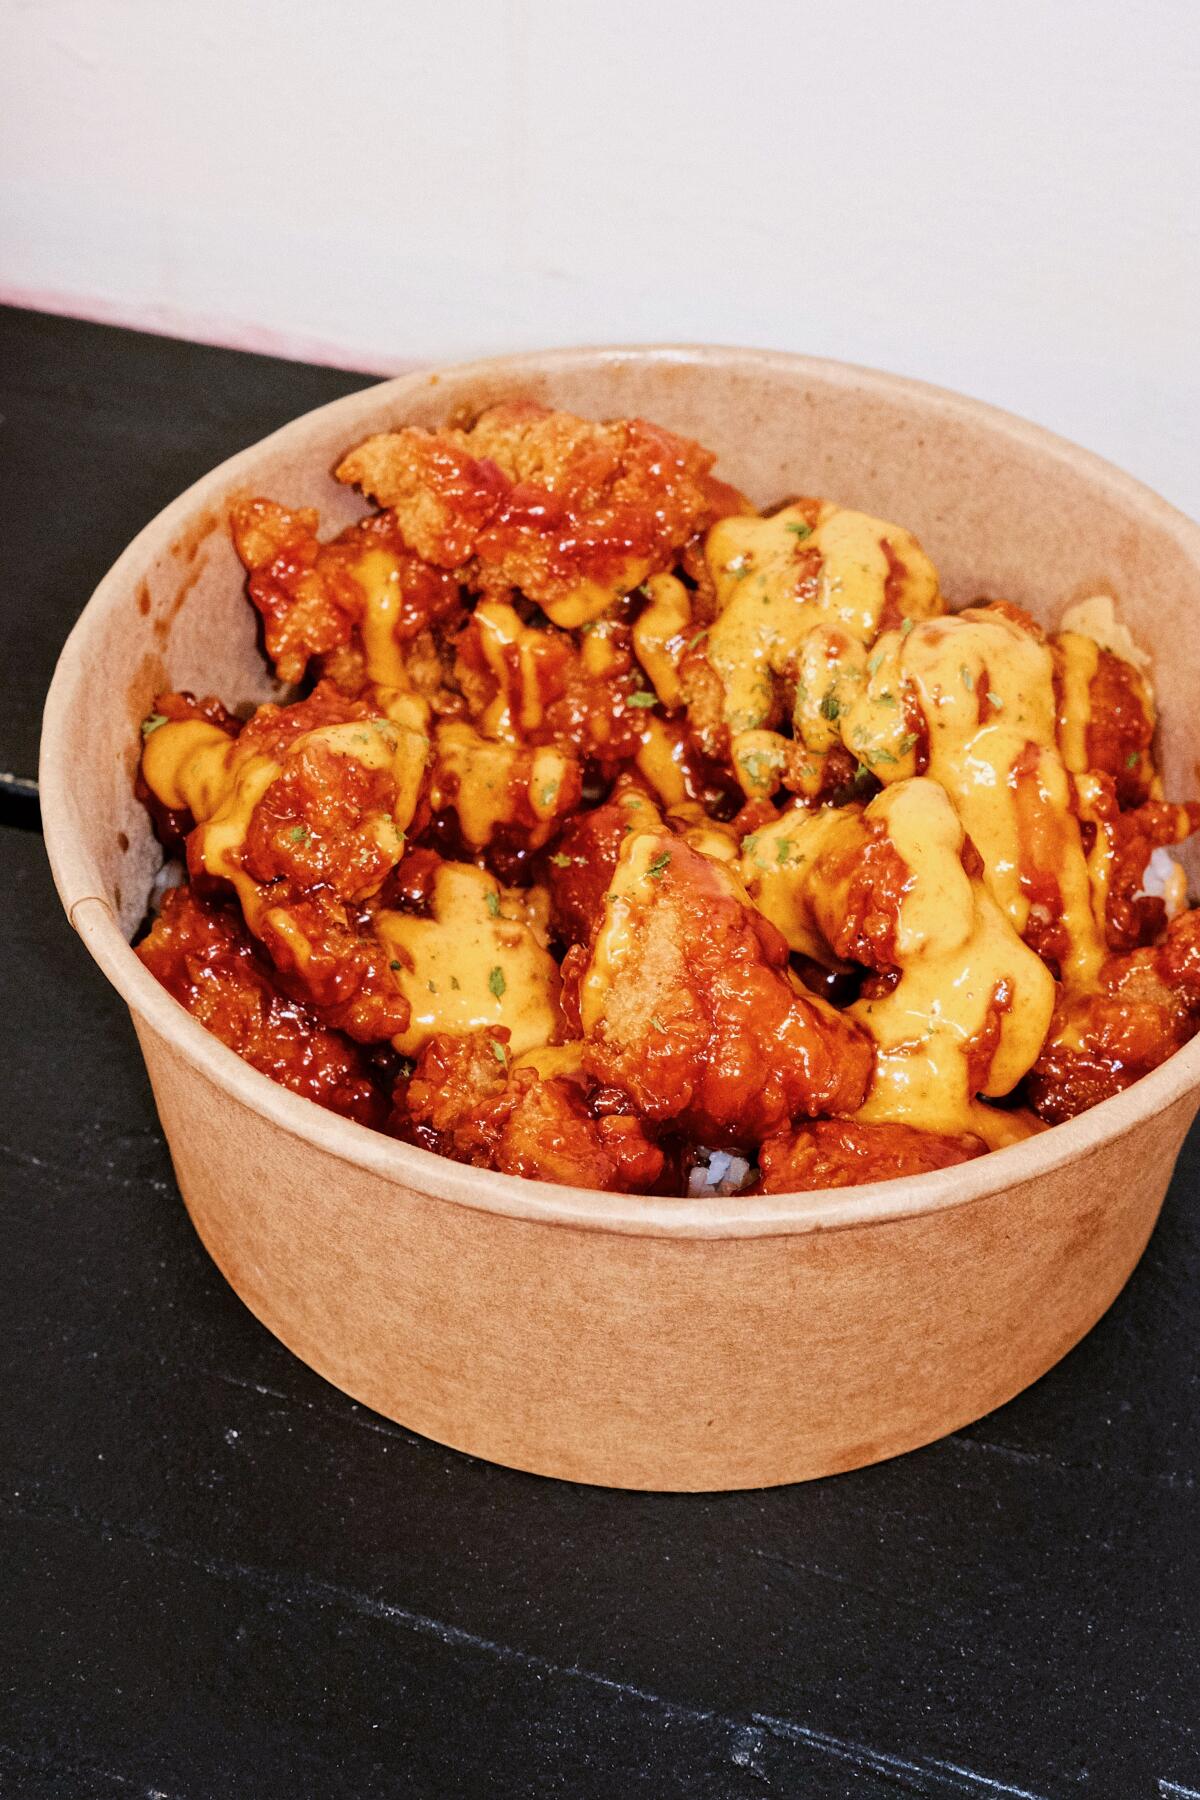 A Korean fried chicken rice bowl with sauce.